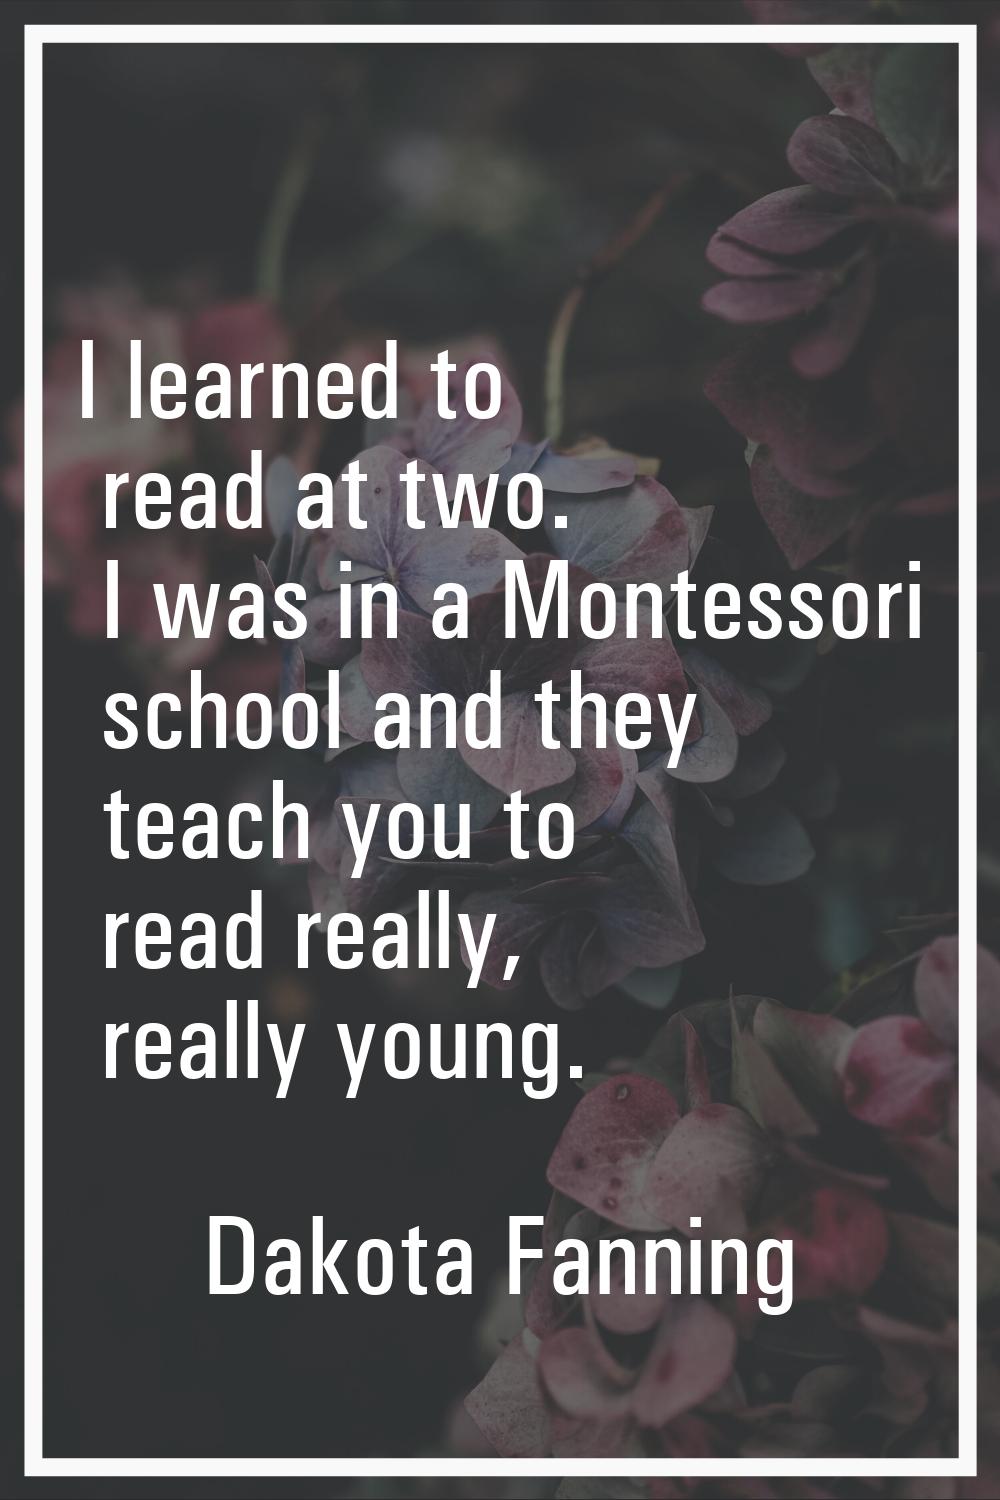 I learned to read at two. I was in a Montessori school and they teach you to read really, really yo